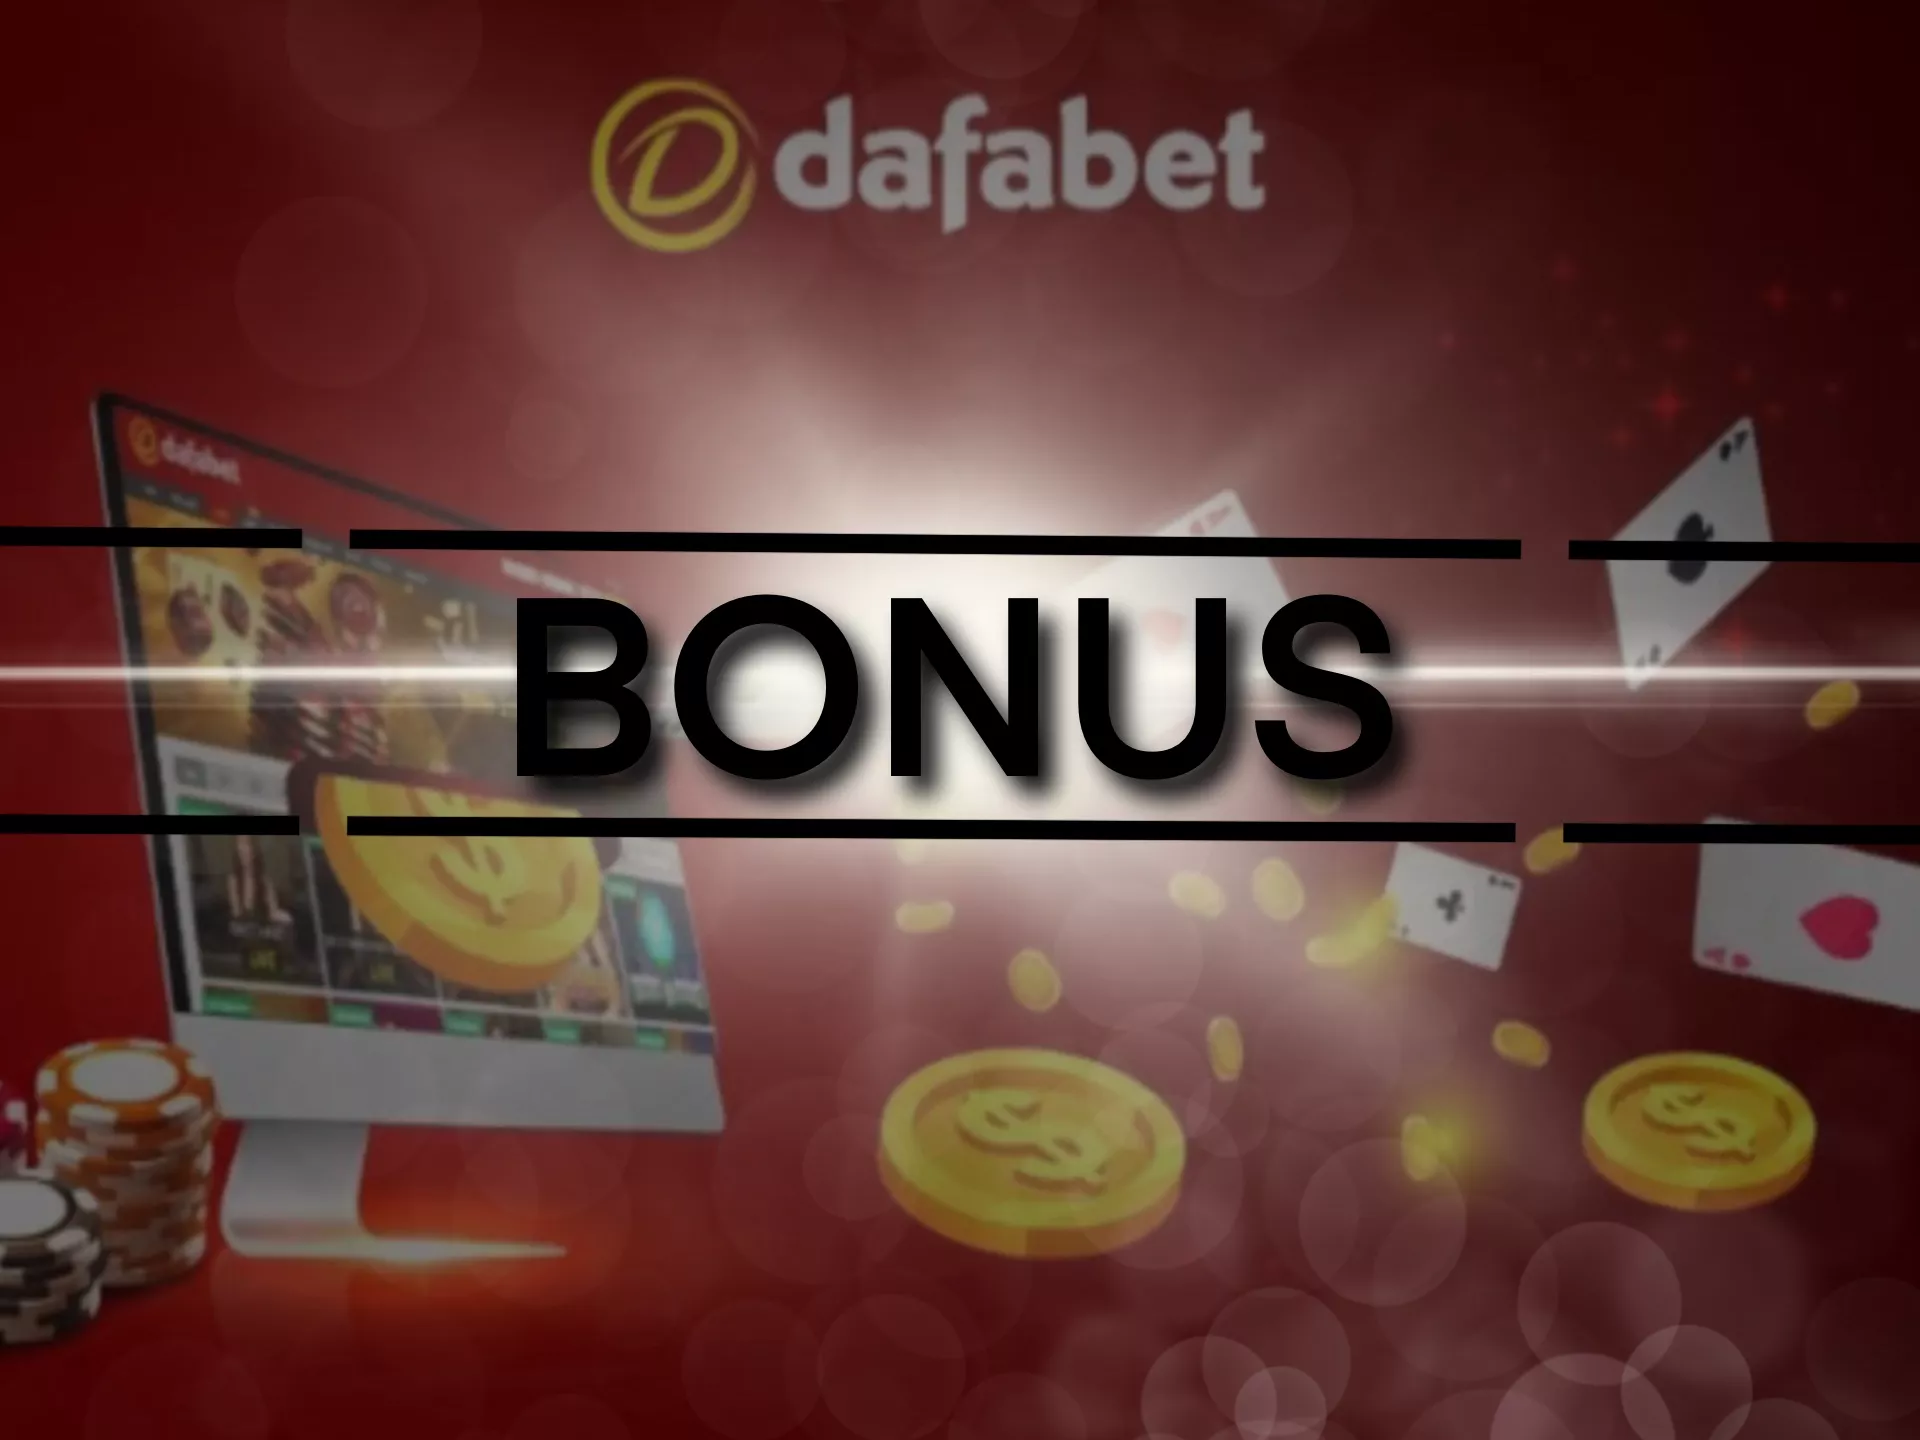 Check the 'Bonuses' page to learn more about bonuses.